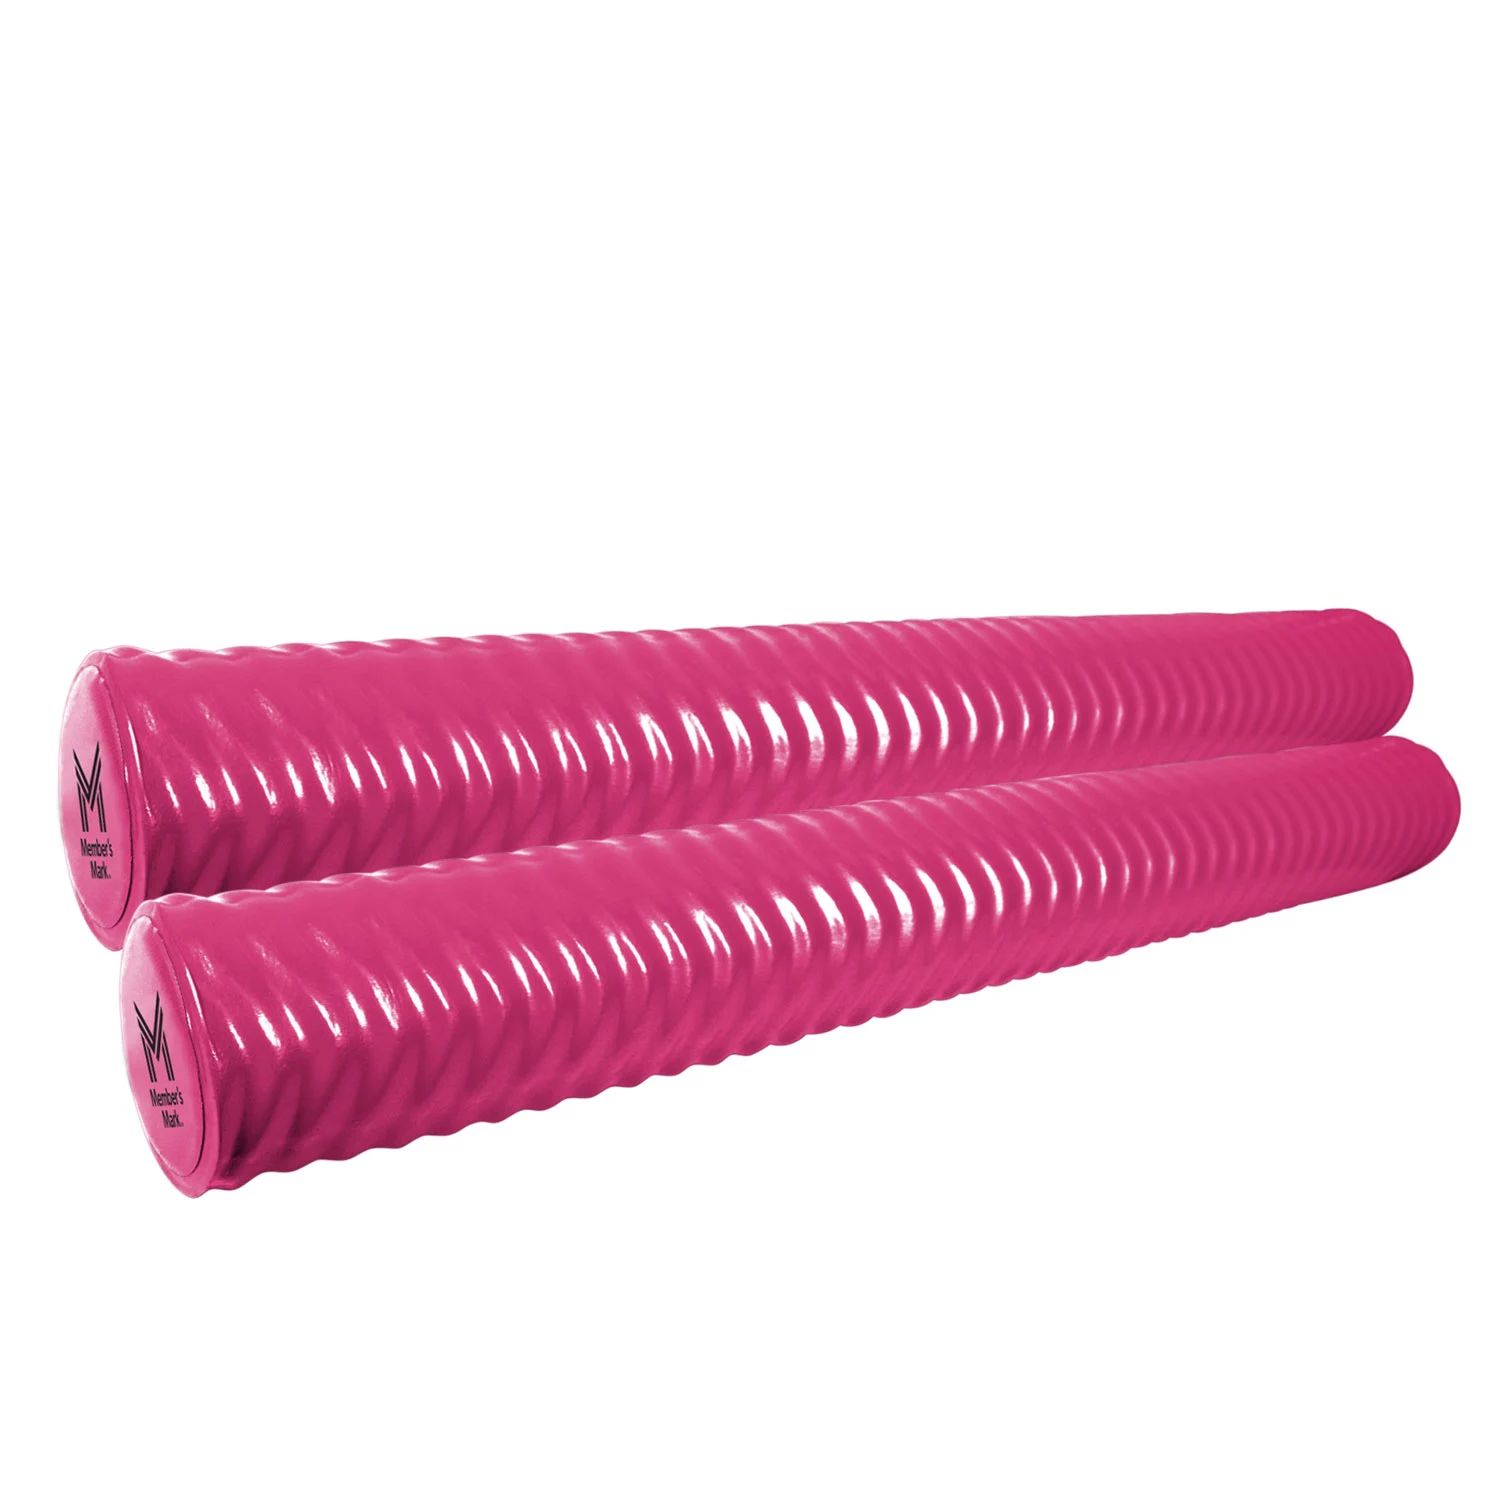 Member's Mark Deluxe Pool Noodle 2-Pack (Assorted Colors) | Sam's Club